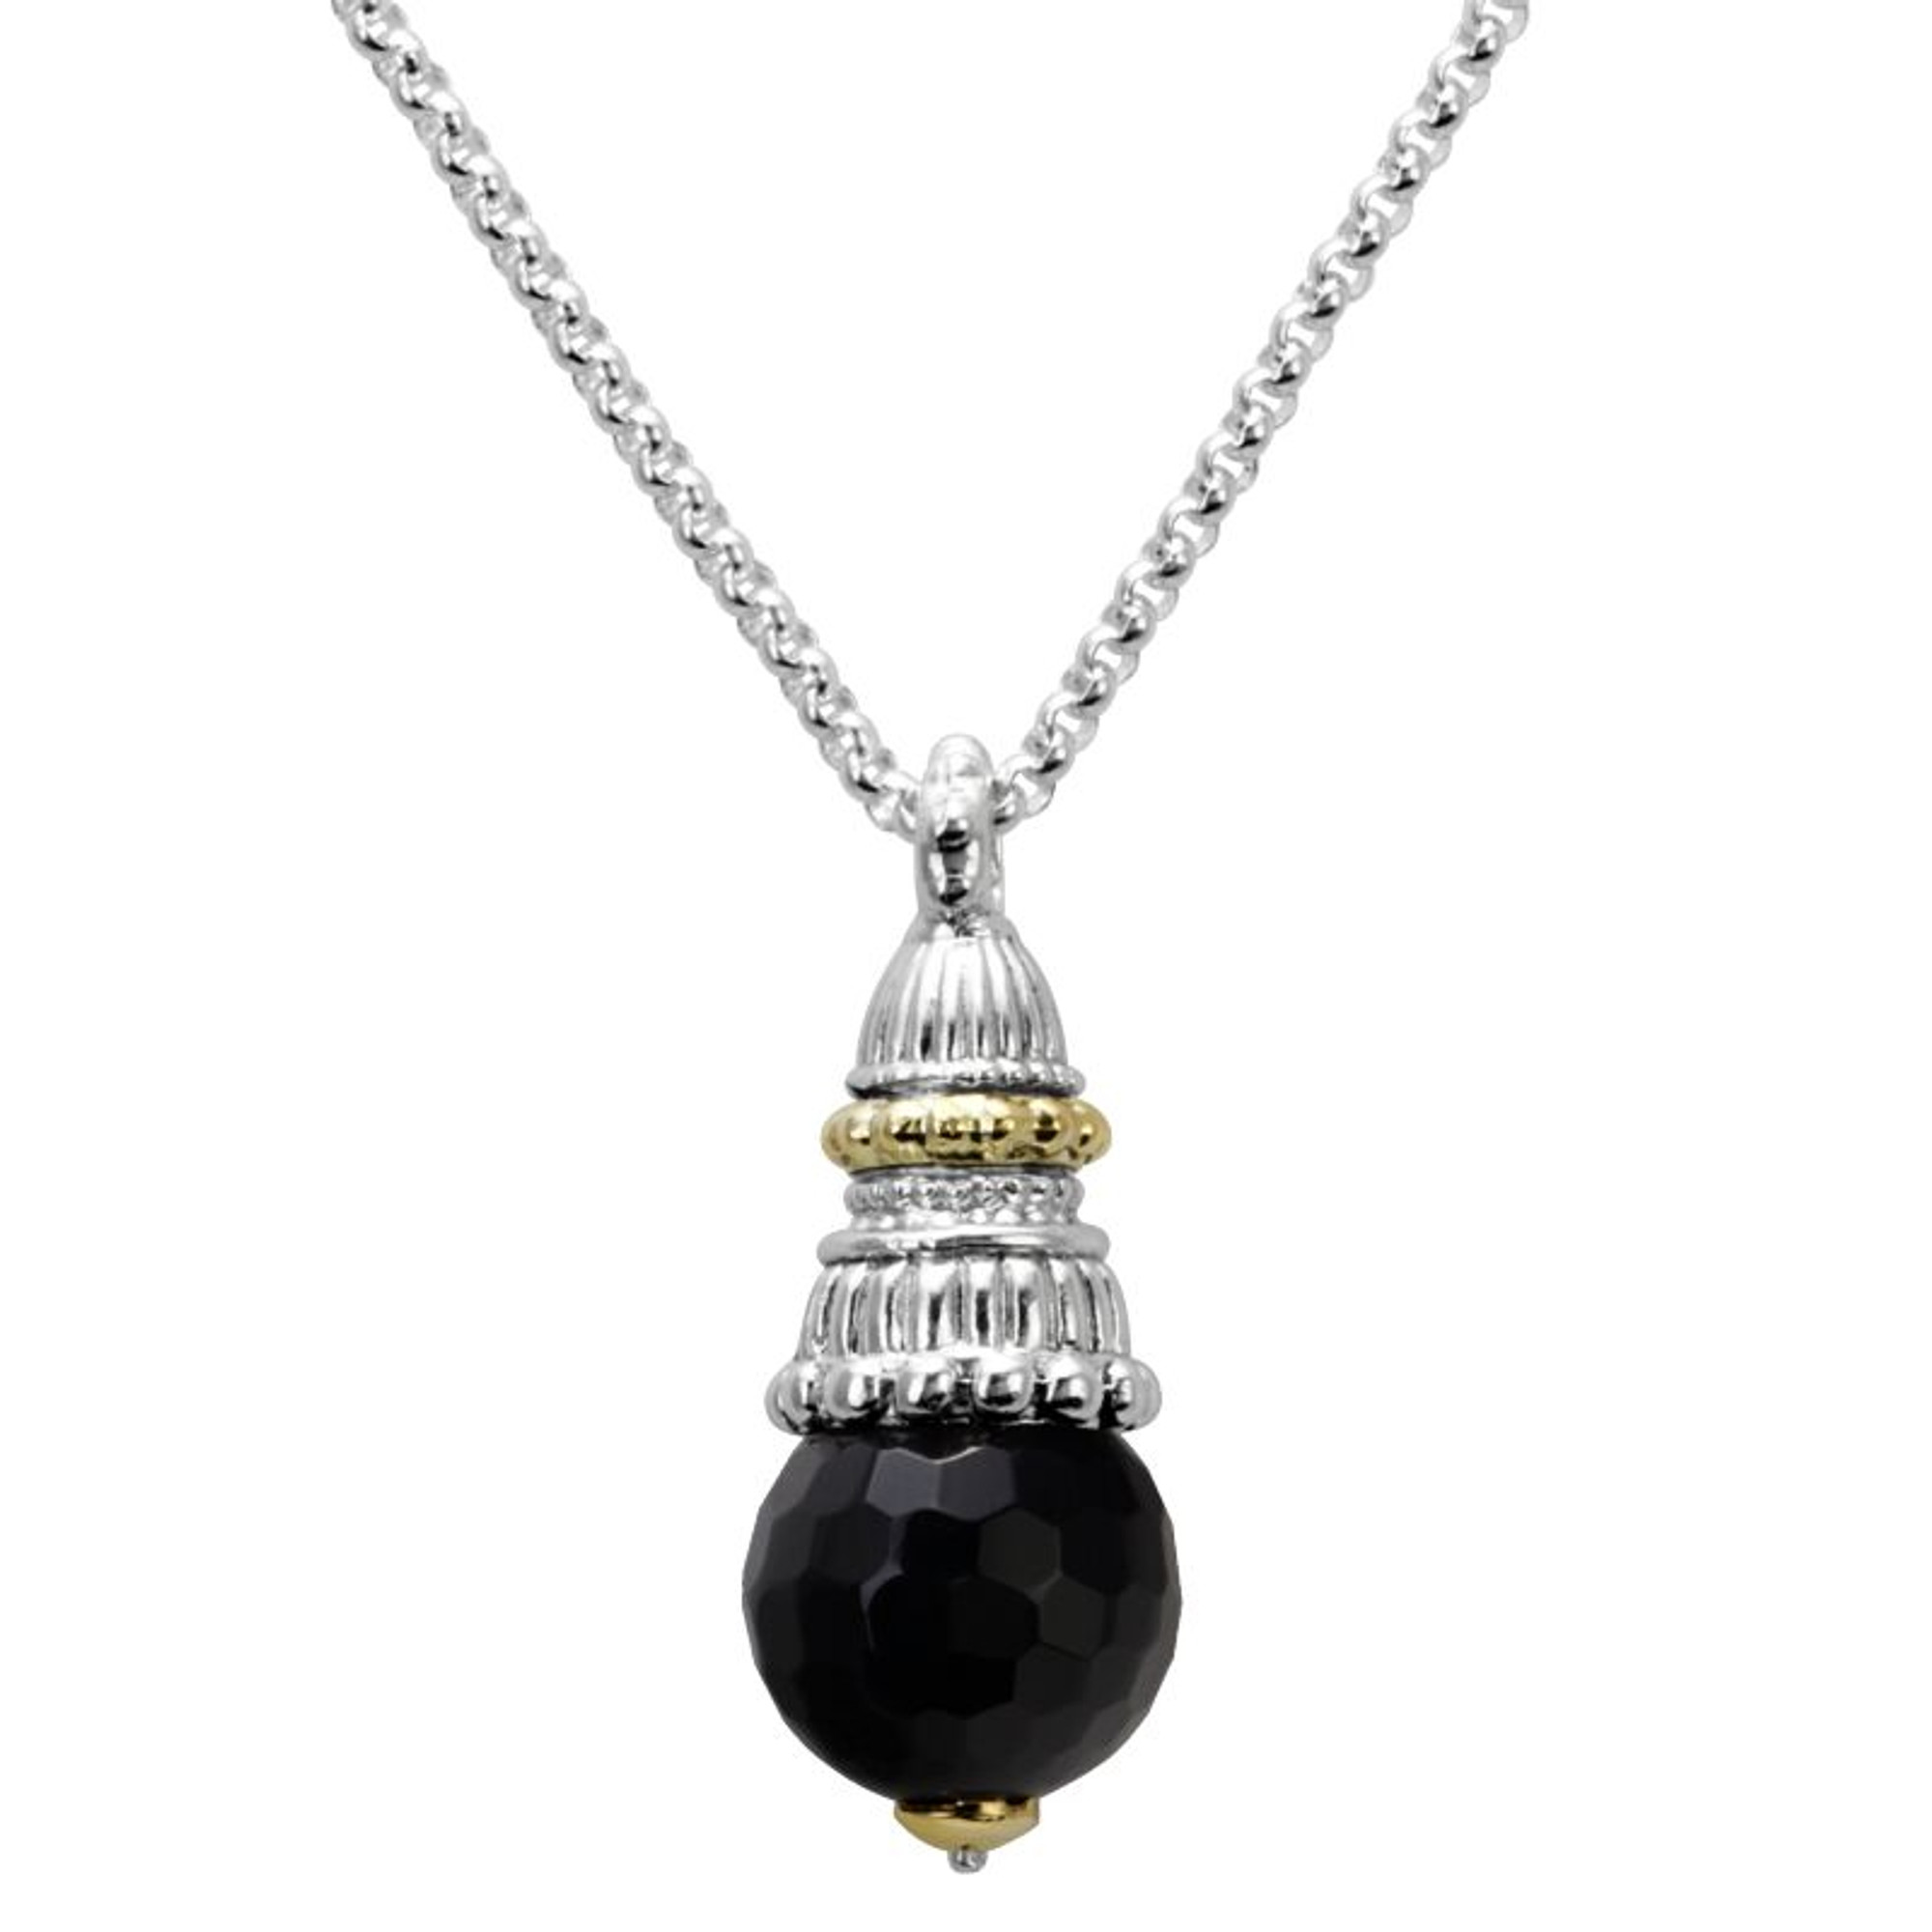 Faceted Black Onyx Necklace by Alwand Vahan